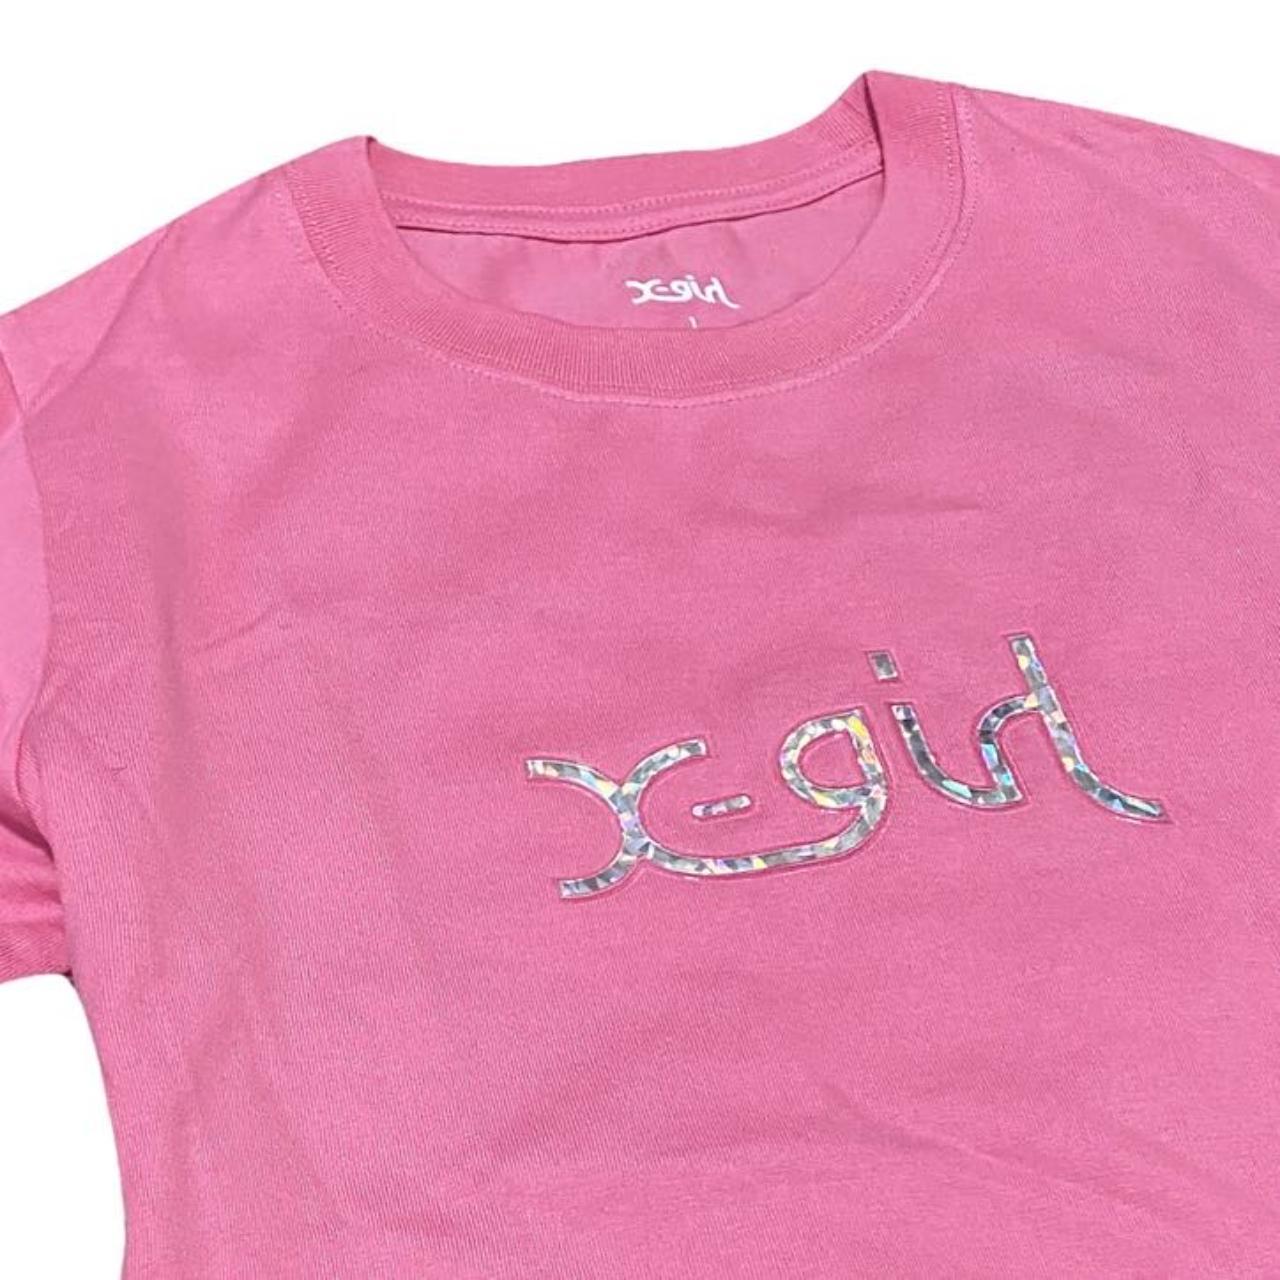 X-Girl  Women's Pink and Silver T-shirt (2)